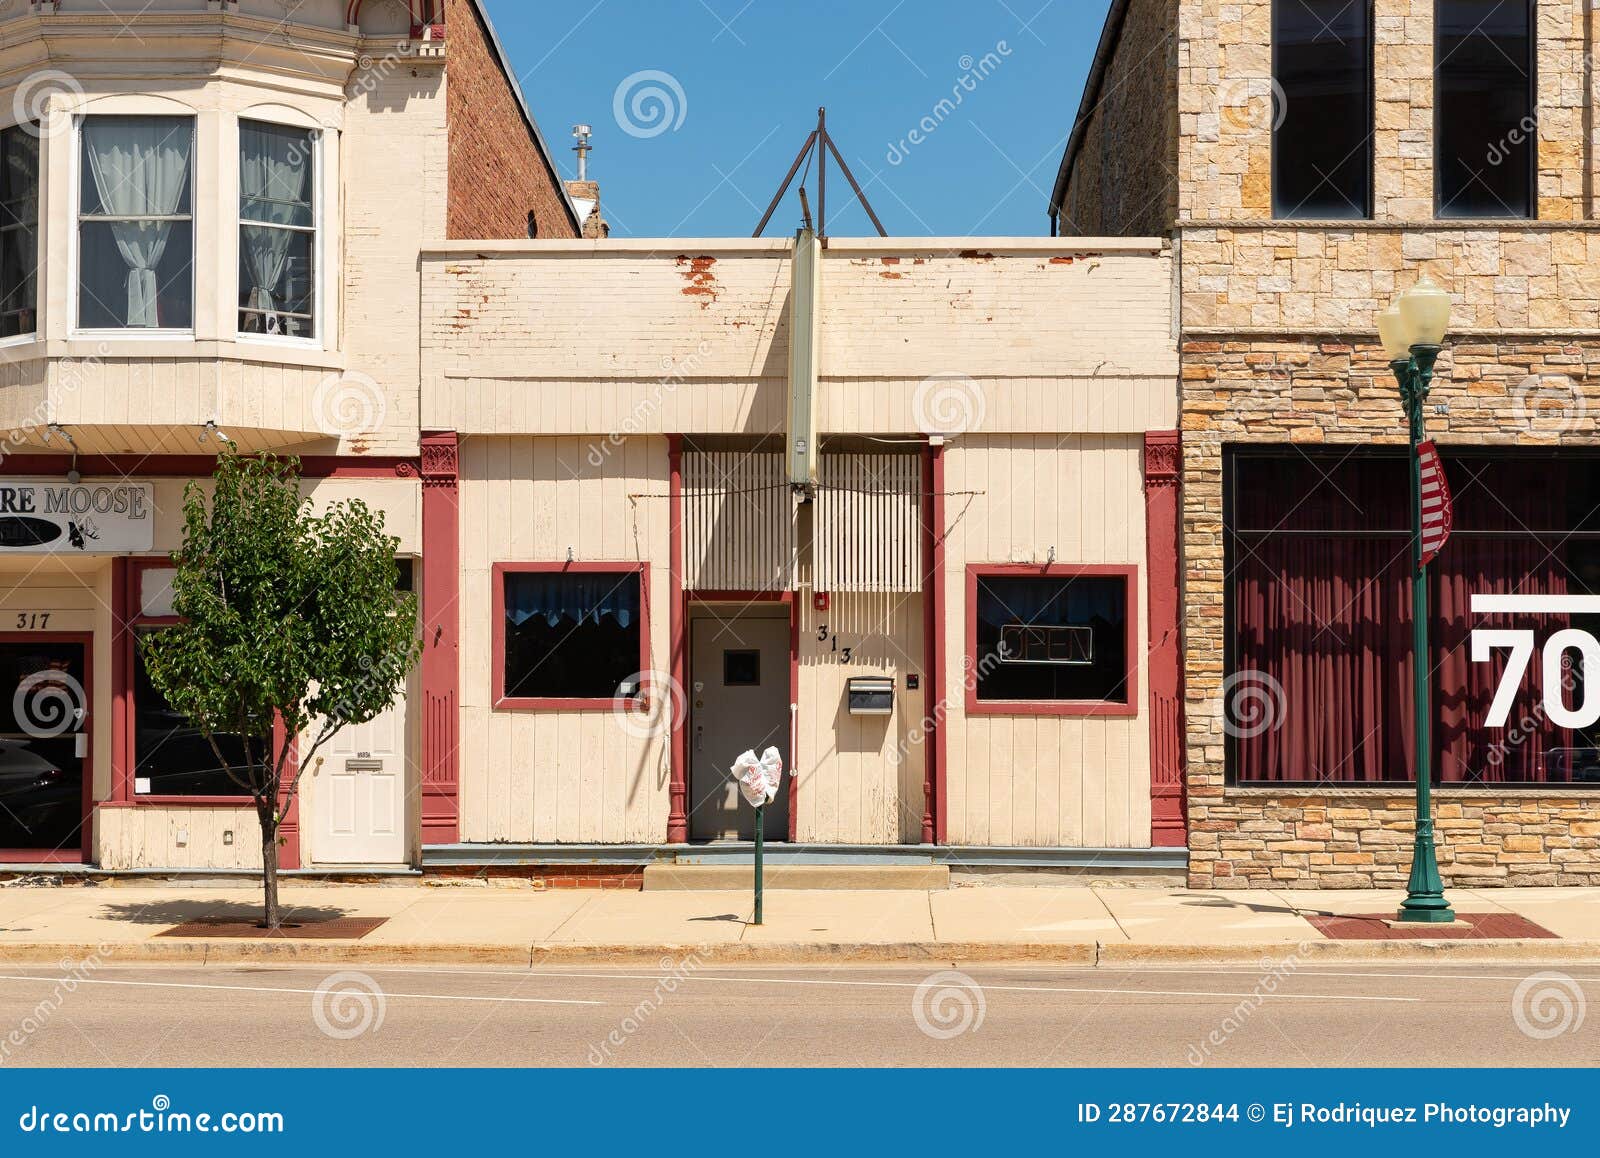 Downtown Sycamore editorial stock image. Image of american - 287672844